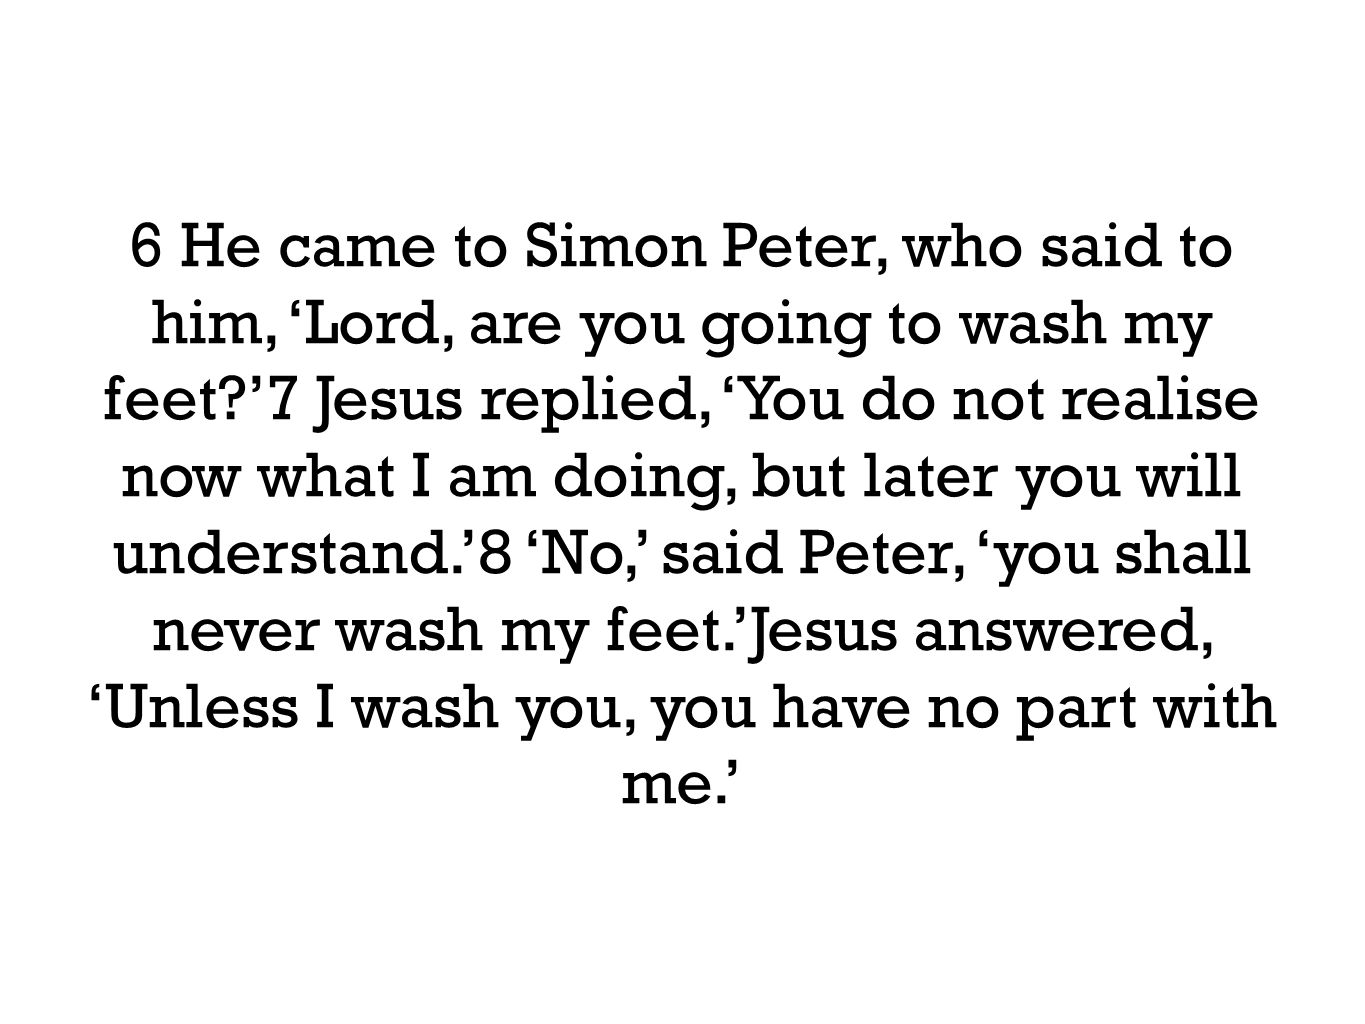 6 He came to Simon Peter, who said to him, ‘Lord, are you going to wash my feet ’7 Jesus replied, ‘You do not realise now what I am doing, but later you will understand.’8 ‘No,’ said Peter, ‘you shall never wash my feet.’Jesus answered, ‘Unless I wash you, you have no part with me.’